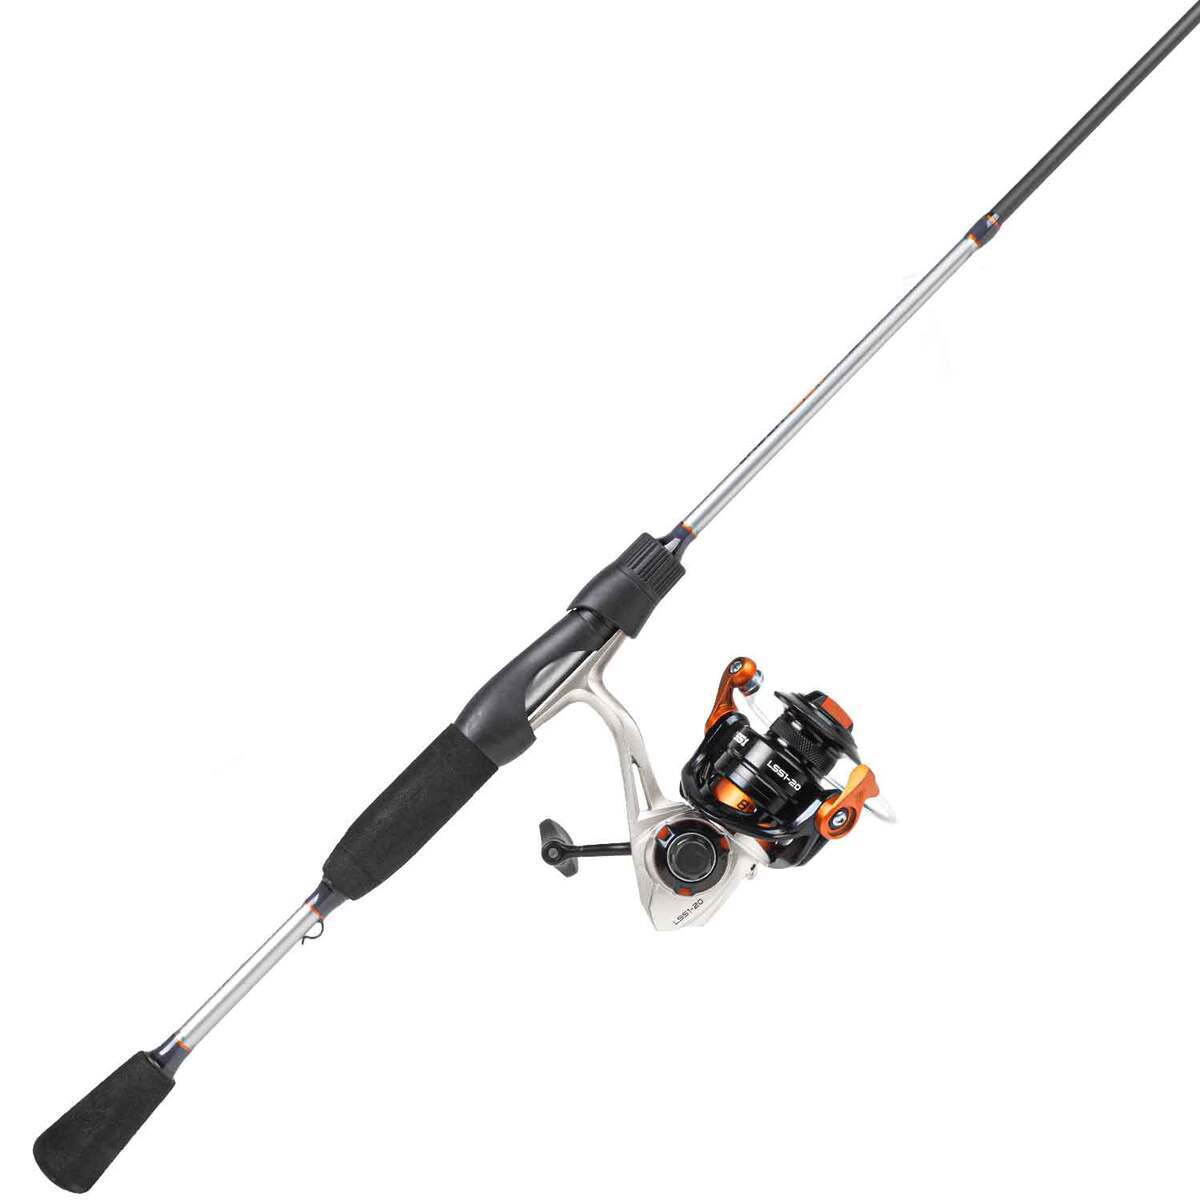 Lews Fishing LLS5050L1 Laserlite Speed Spin Combo for sale